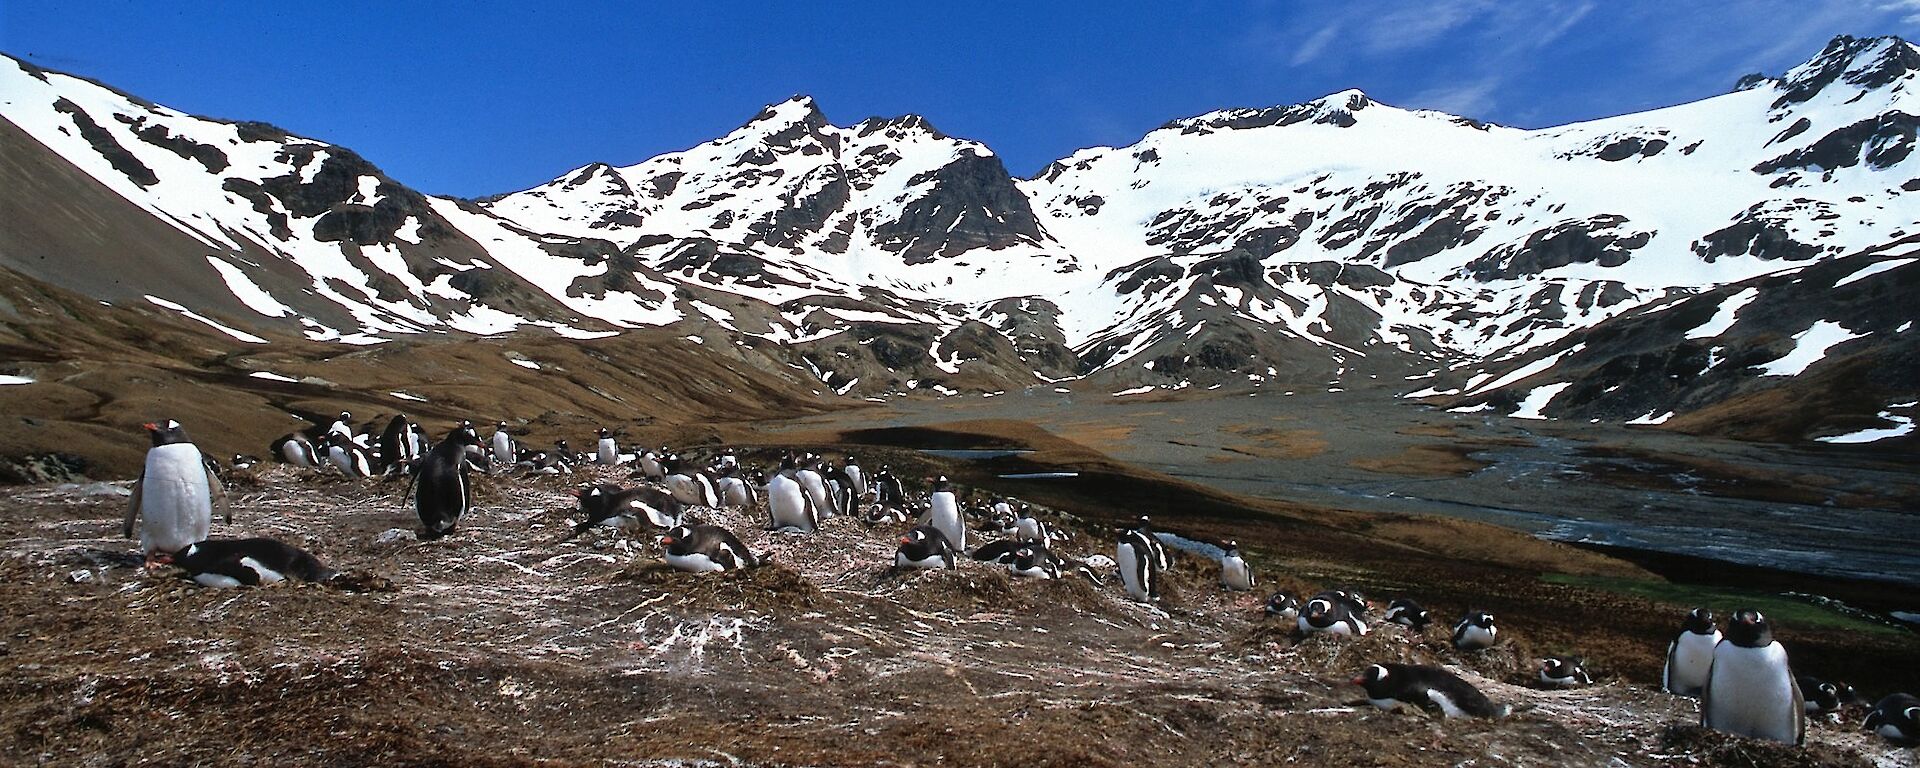 Snow capped mountains of South Georgia with gentoo penguin colony in foreground